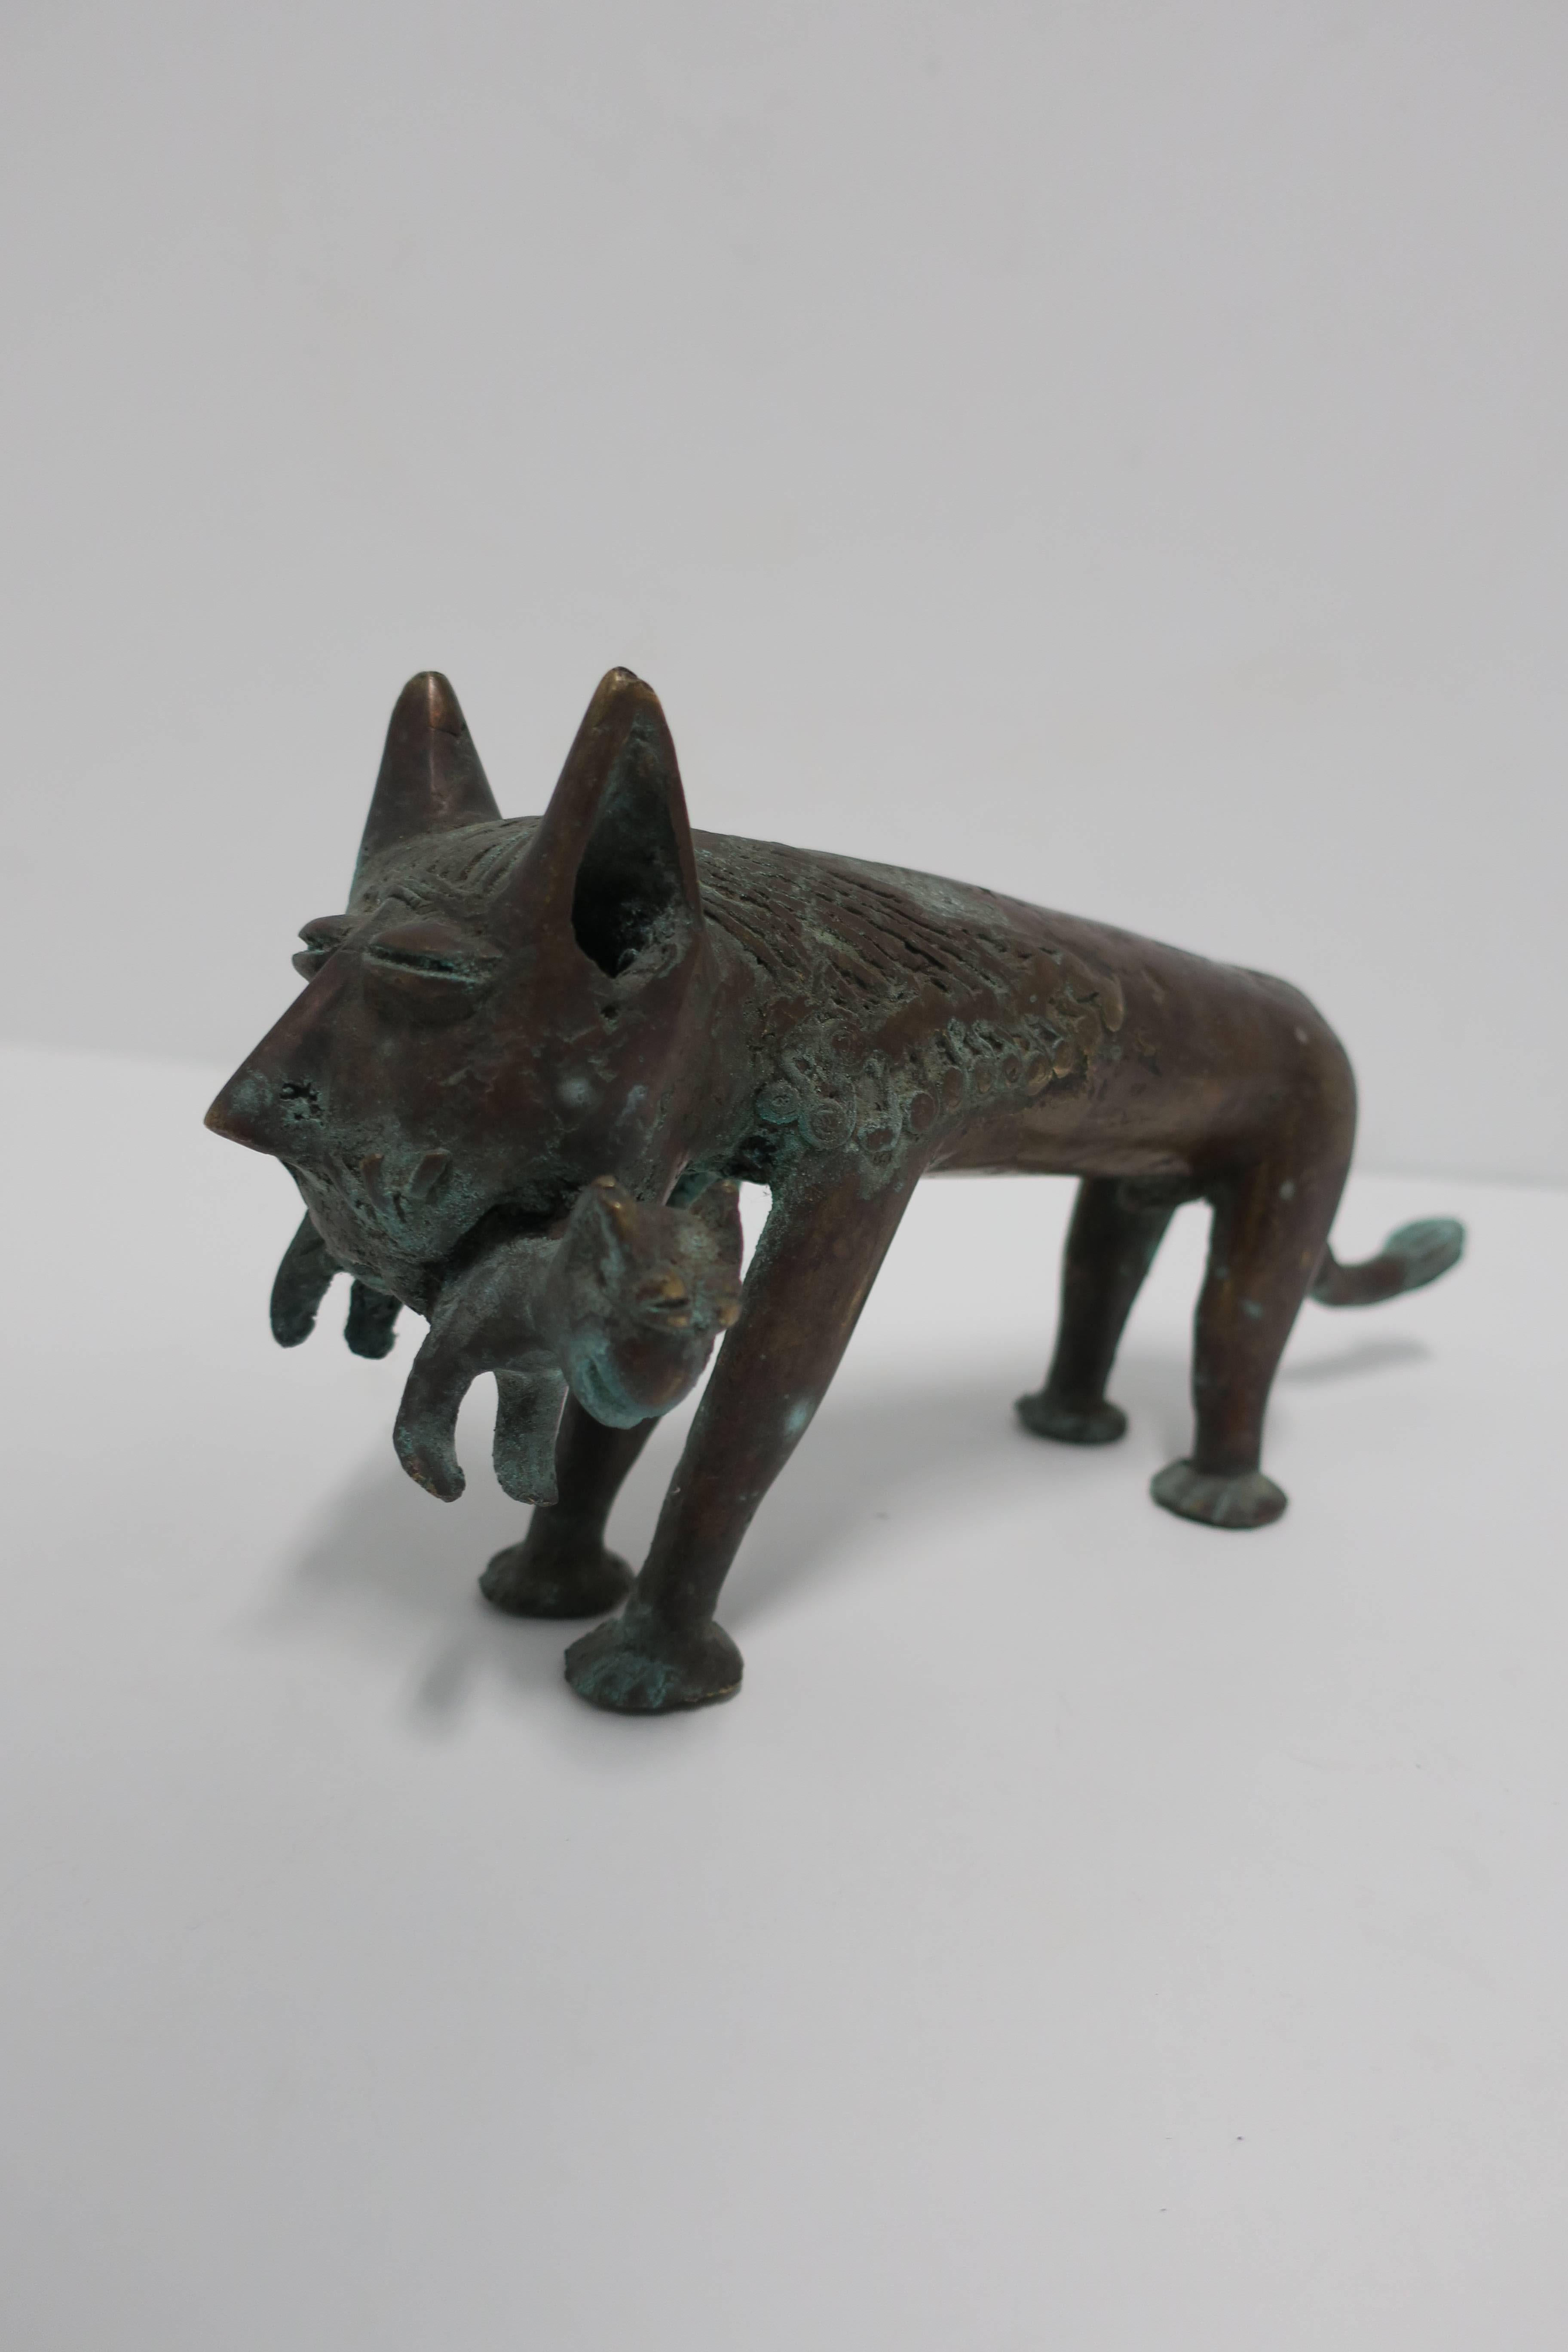 A very substantial and unique modern cat sculpture in solid bronze. Sculpture depicts cat carrying baby cat/kitten. 

Piece measures: 4.25